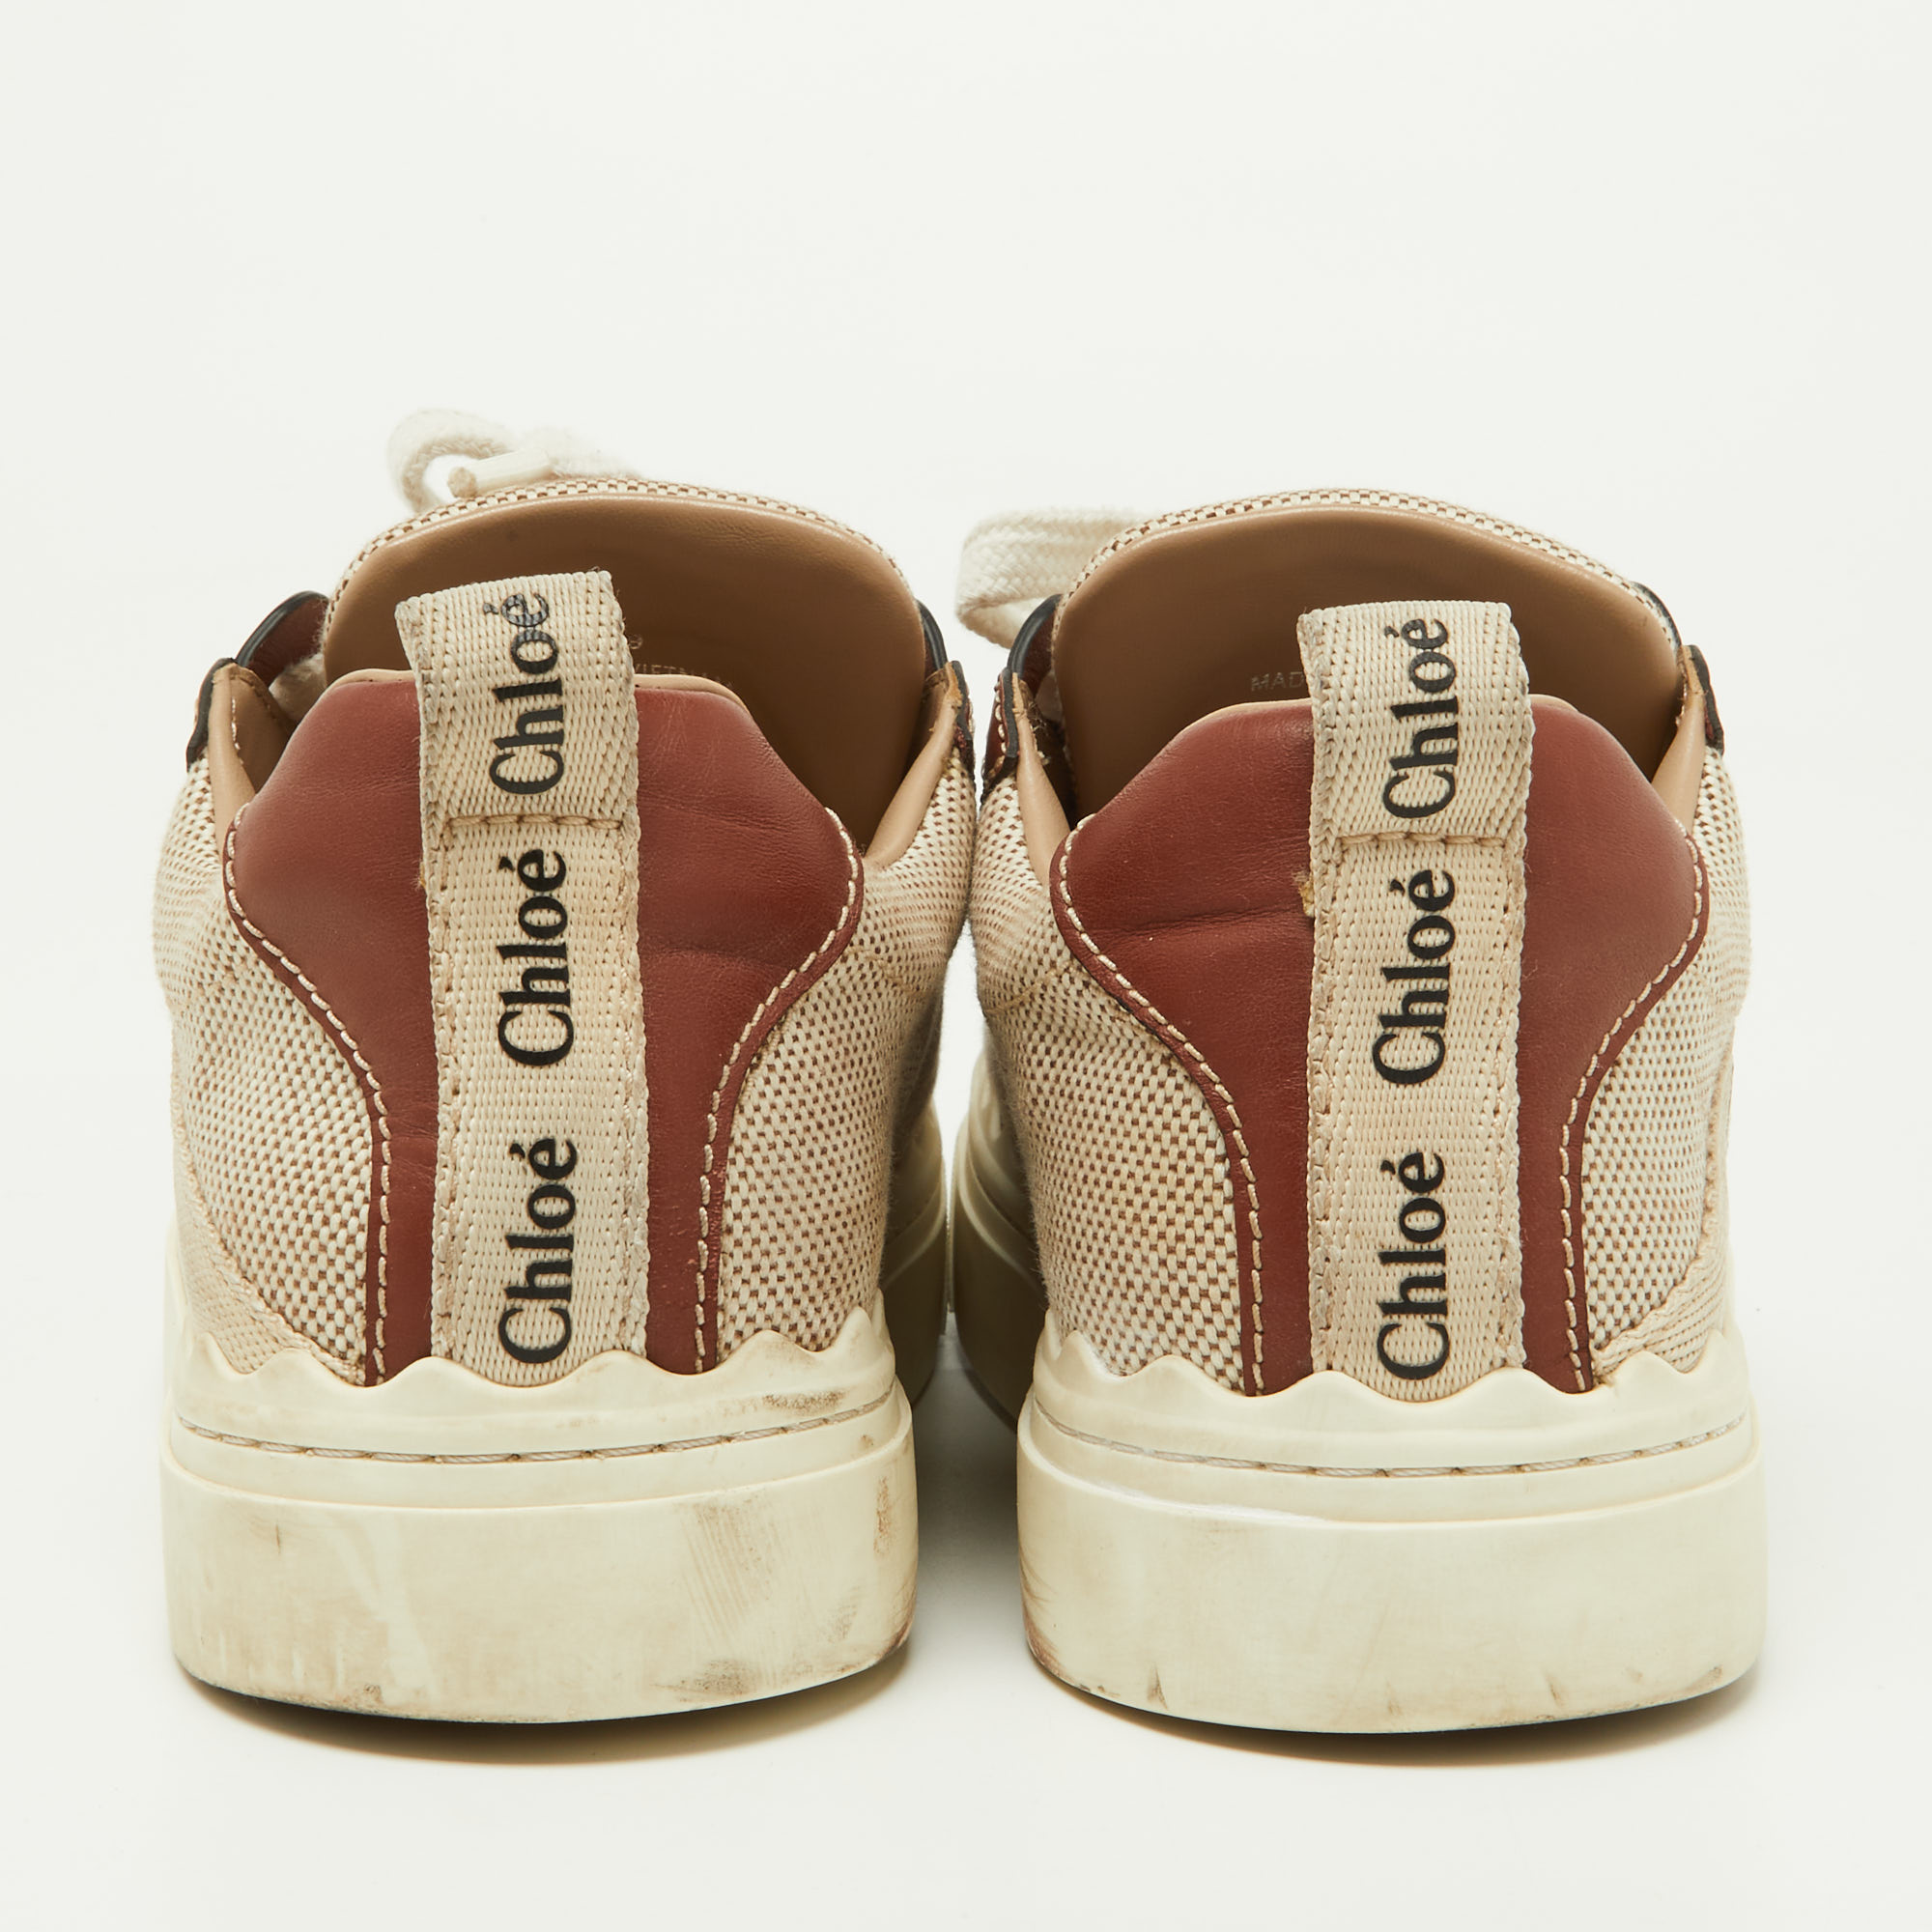 Chloe Brown/Beige Canvas And Leather Lauren Sneakers Size 39